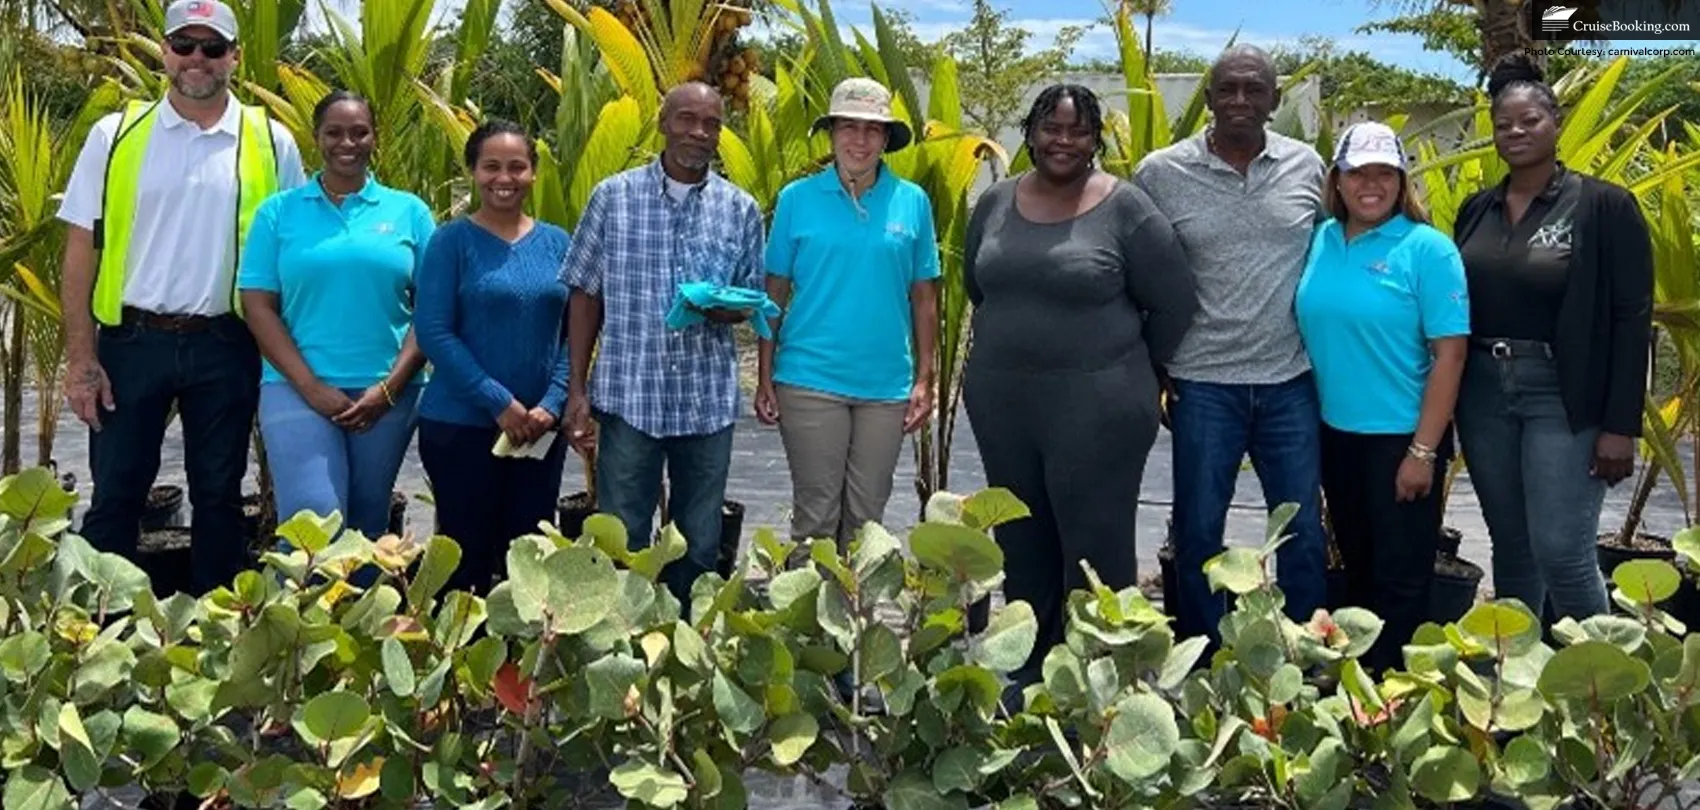 Carnival Bought 5,000 Trees for Celebration Key Private Island